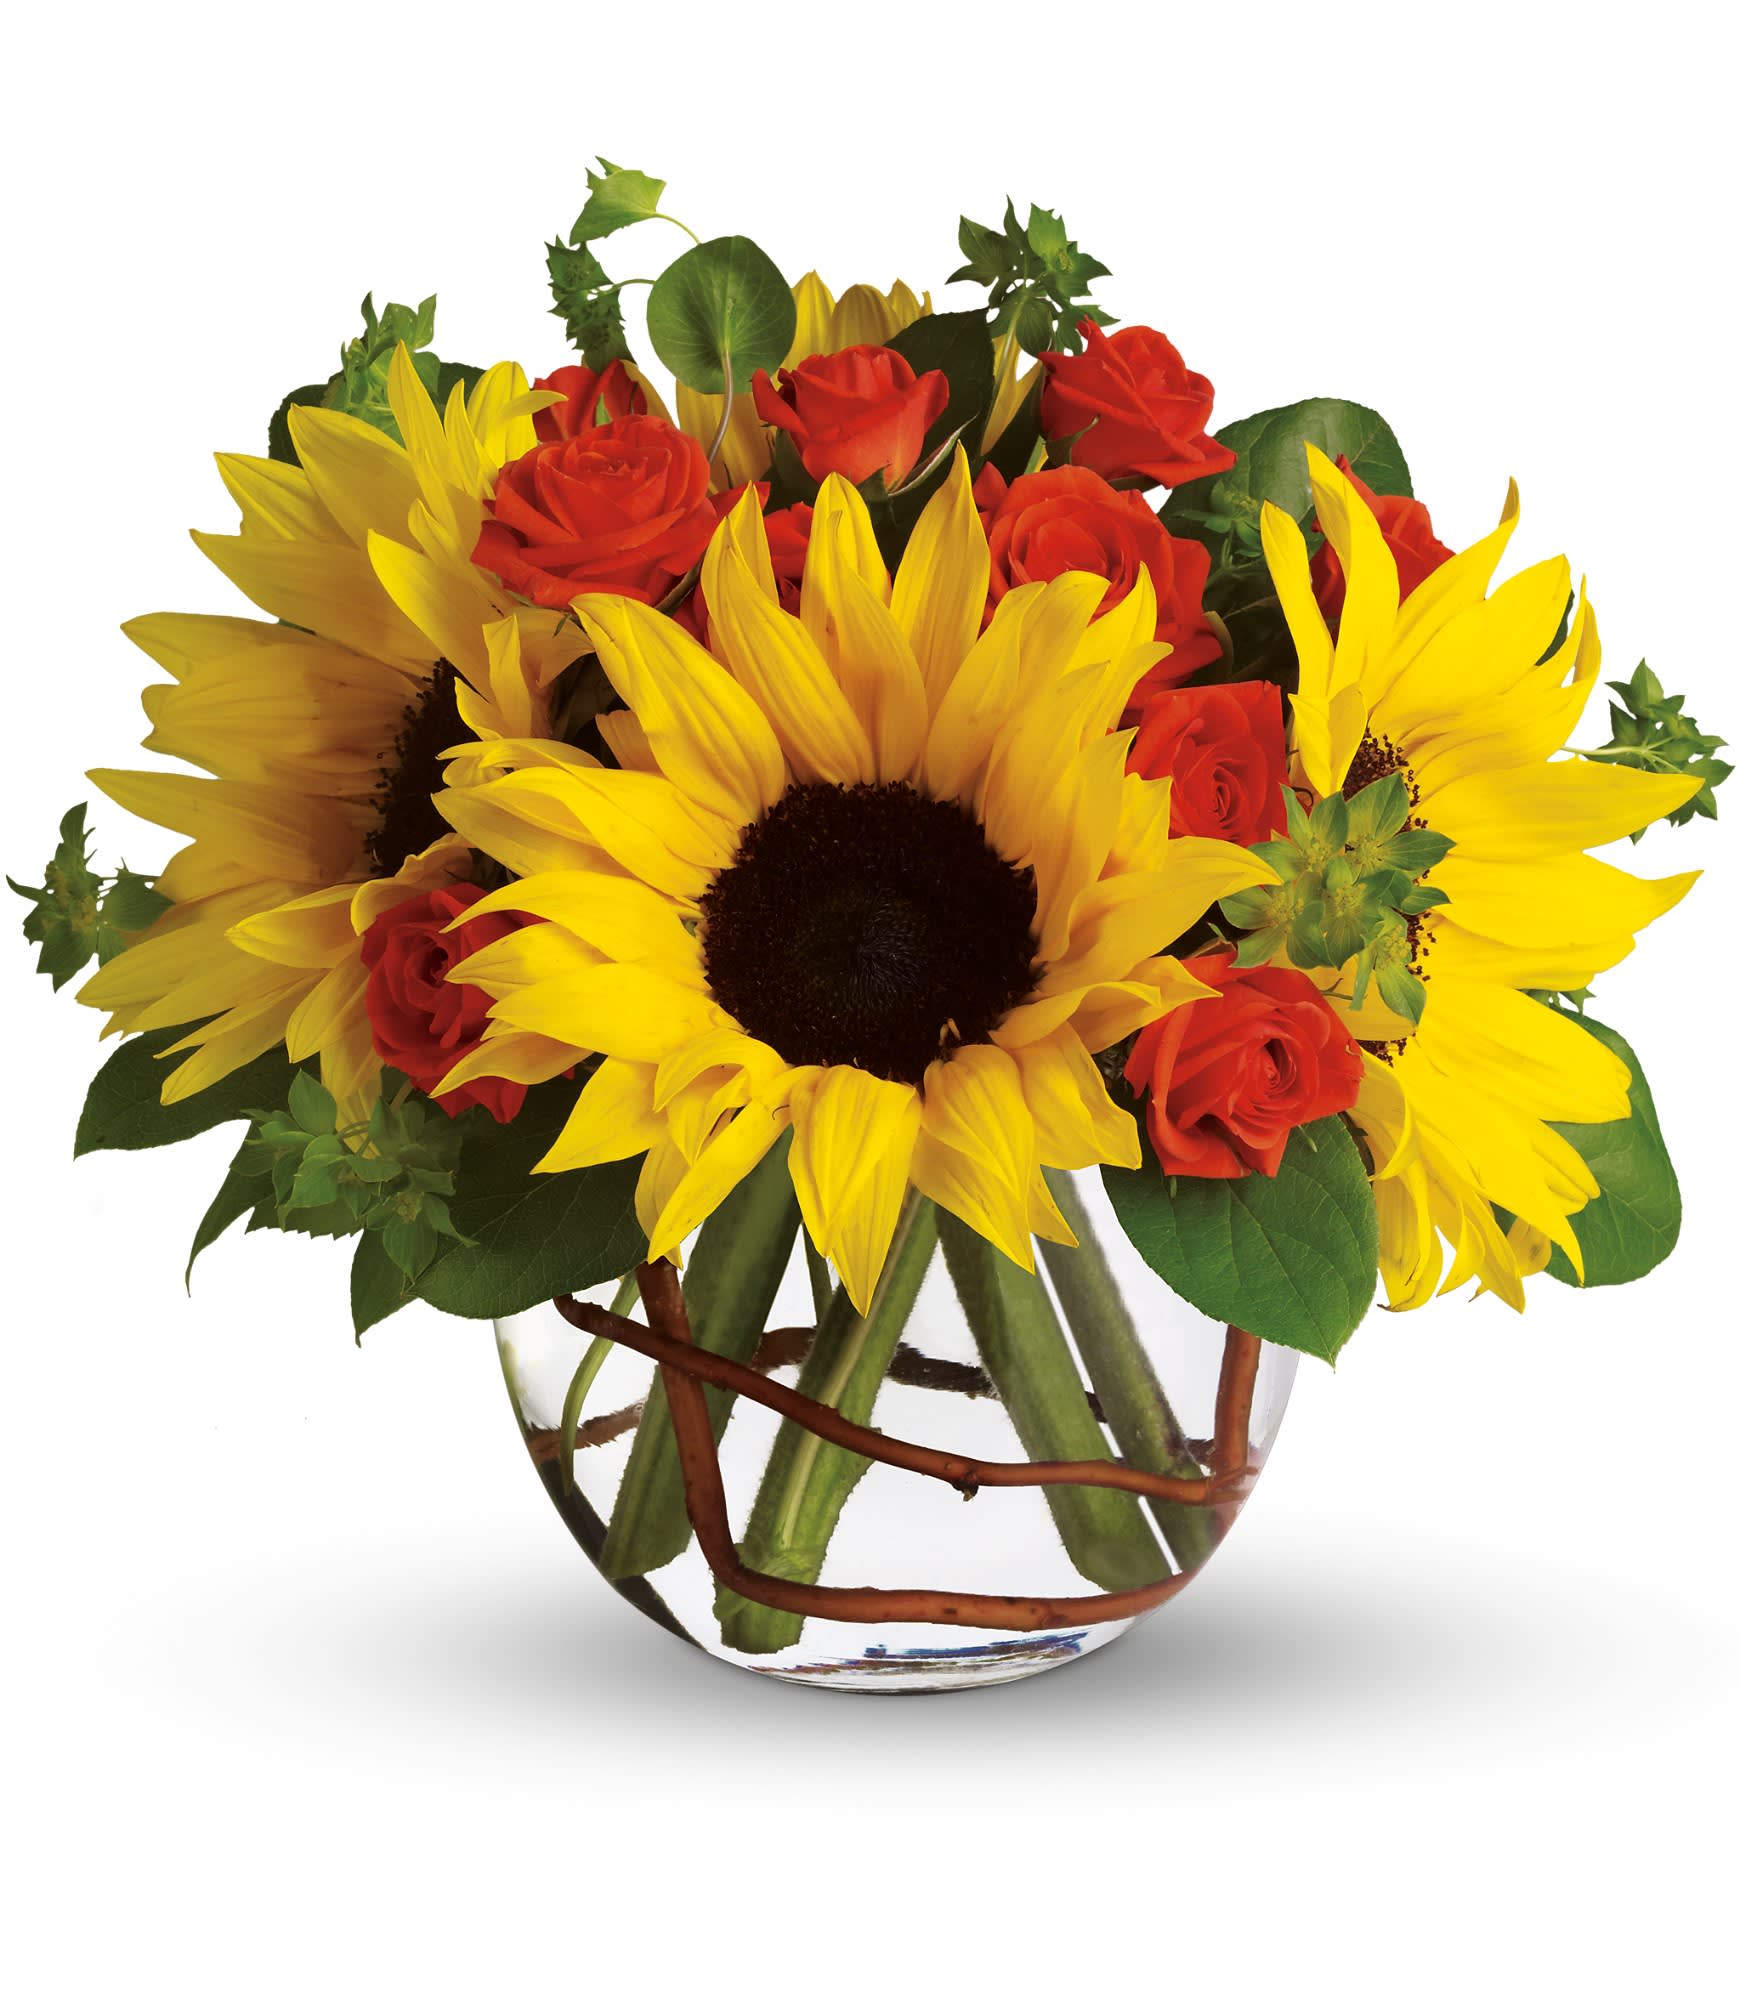 Sunny Sunflowers - Whoever receives this stunning bouquet is sure to be bowled over by its bold beauty! It's big on fun and big on flowers. 